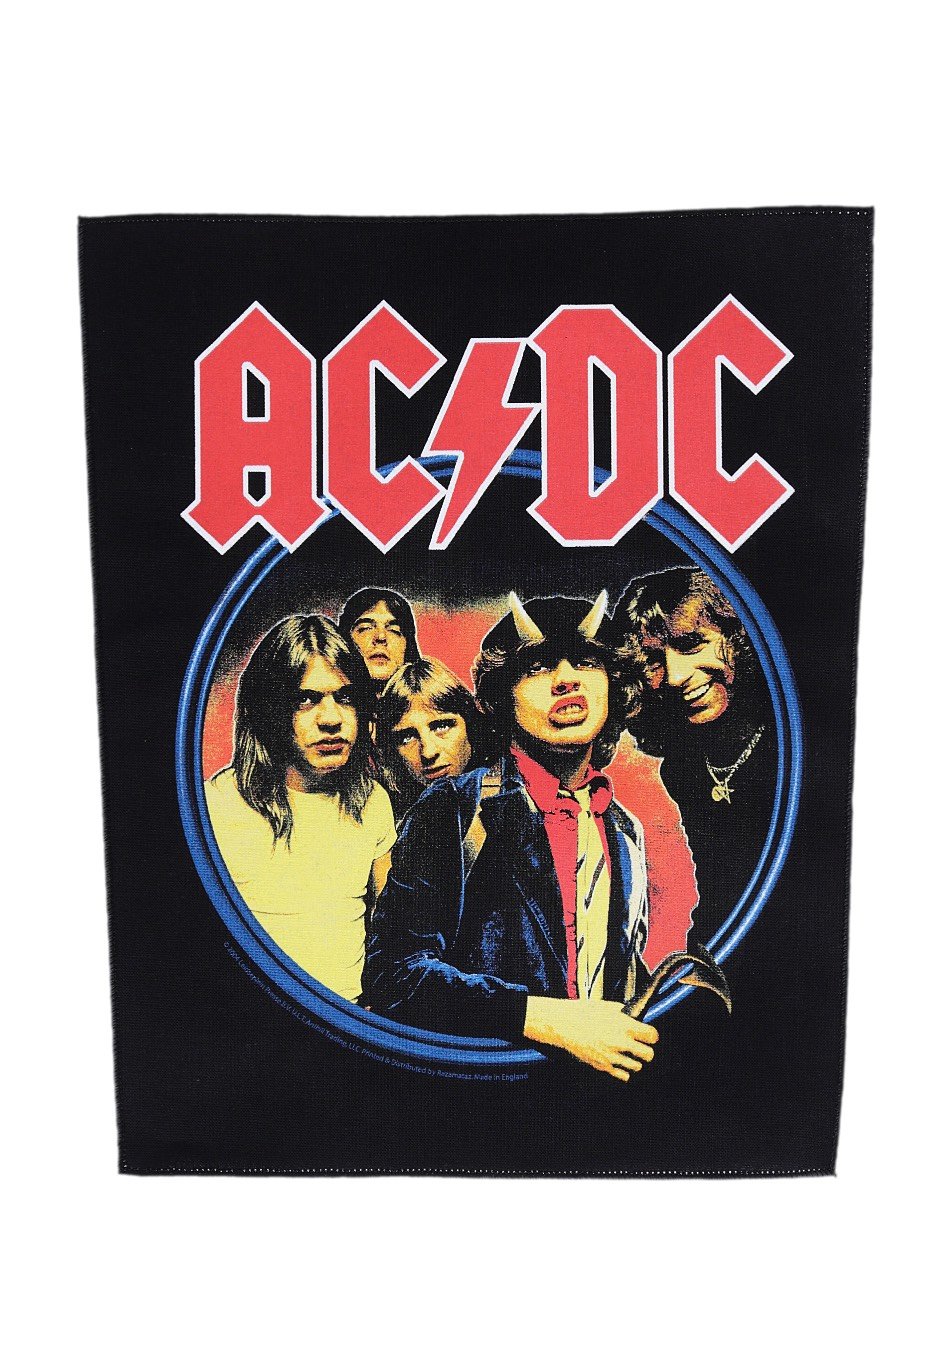 AC/DC - Highway To Hell - Backpatch